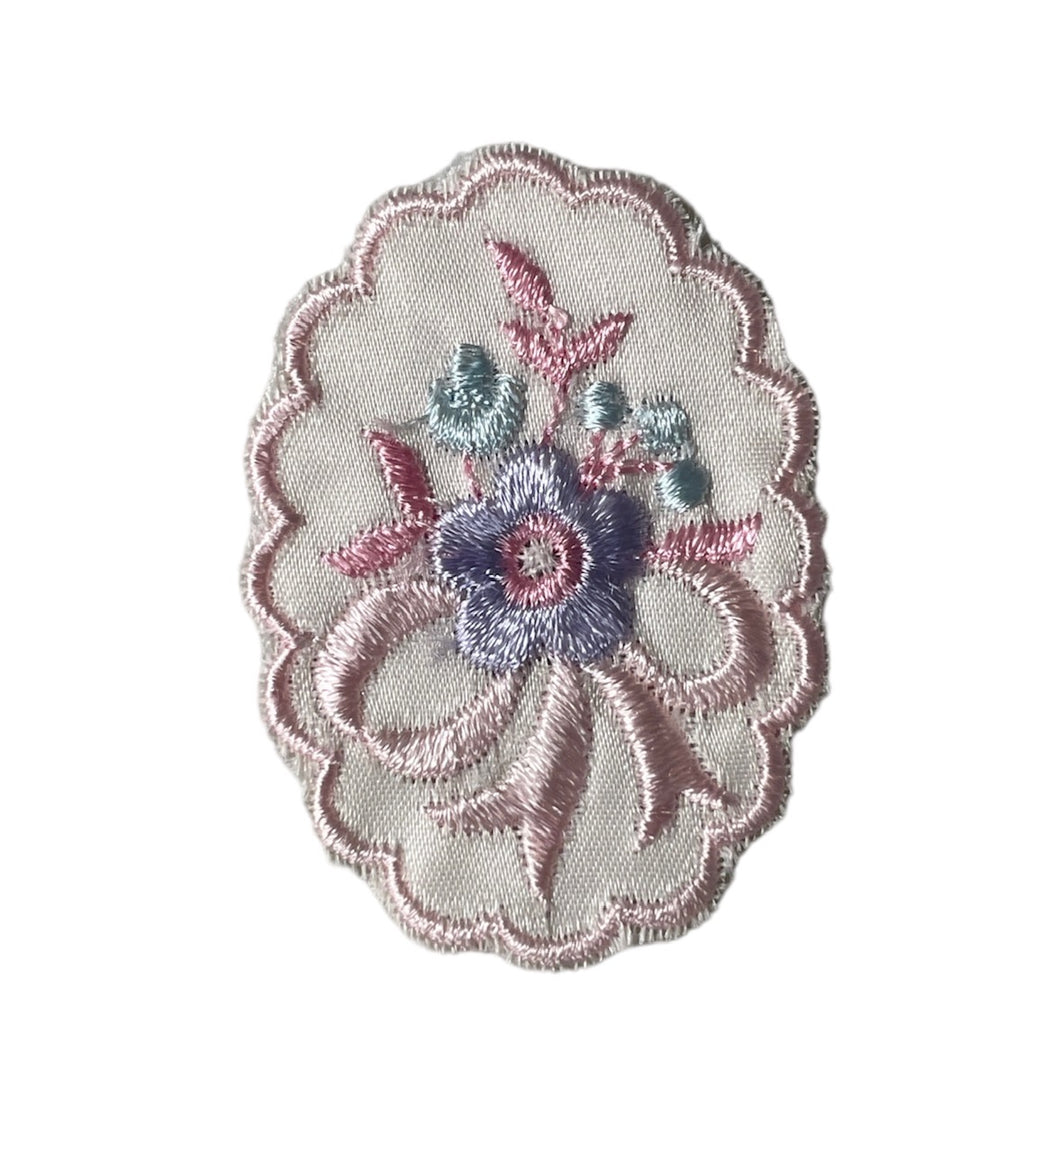 Flower embroidered with Lace 1.5